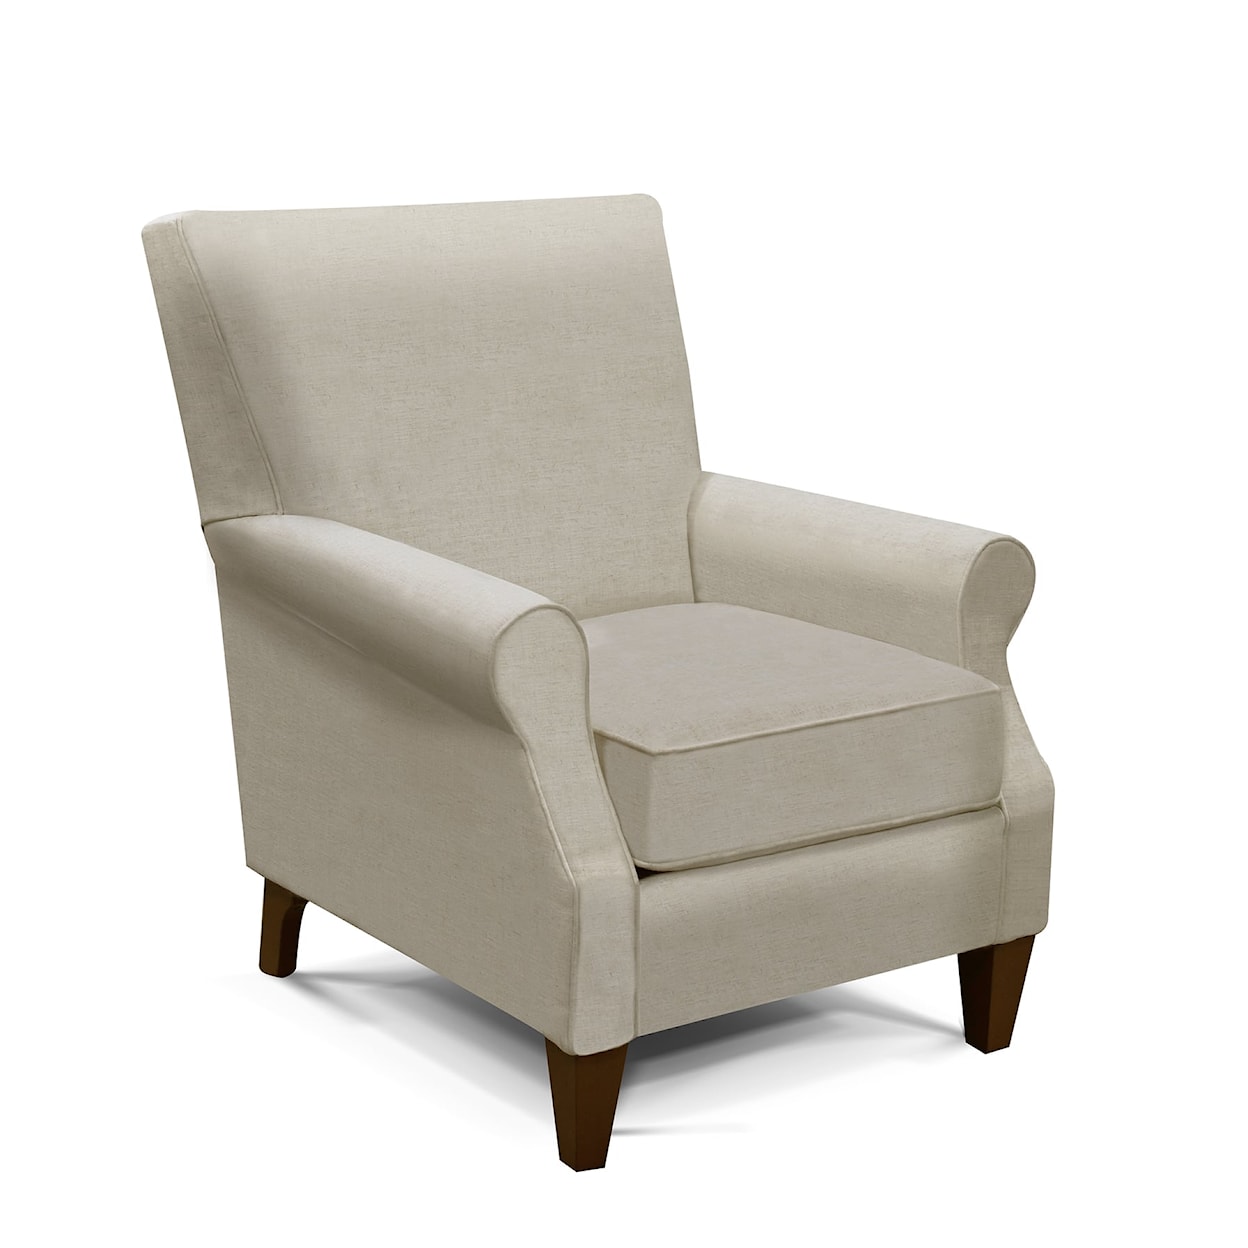 England Metromix - East Side Accent Chair